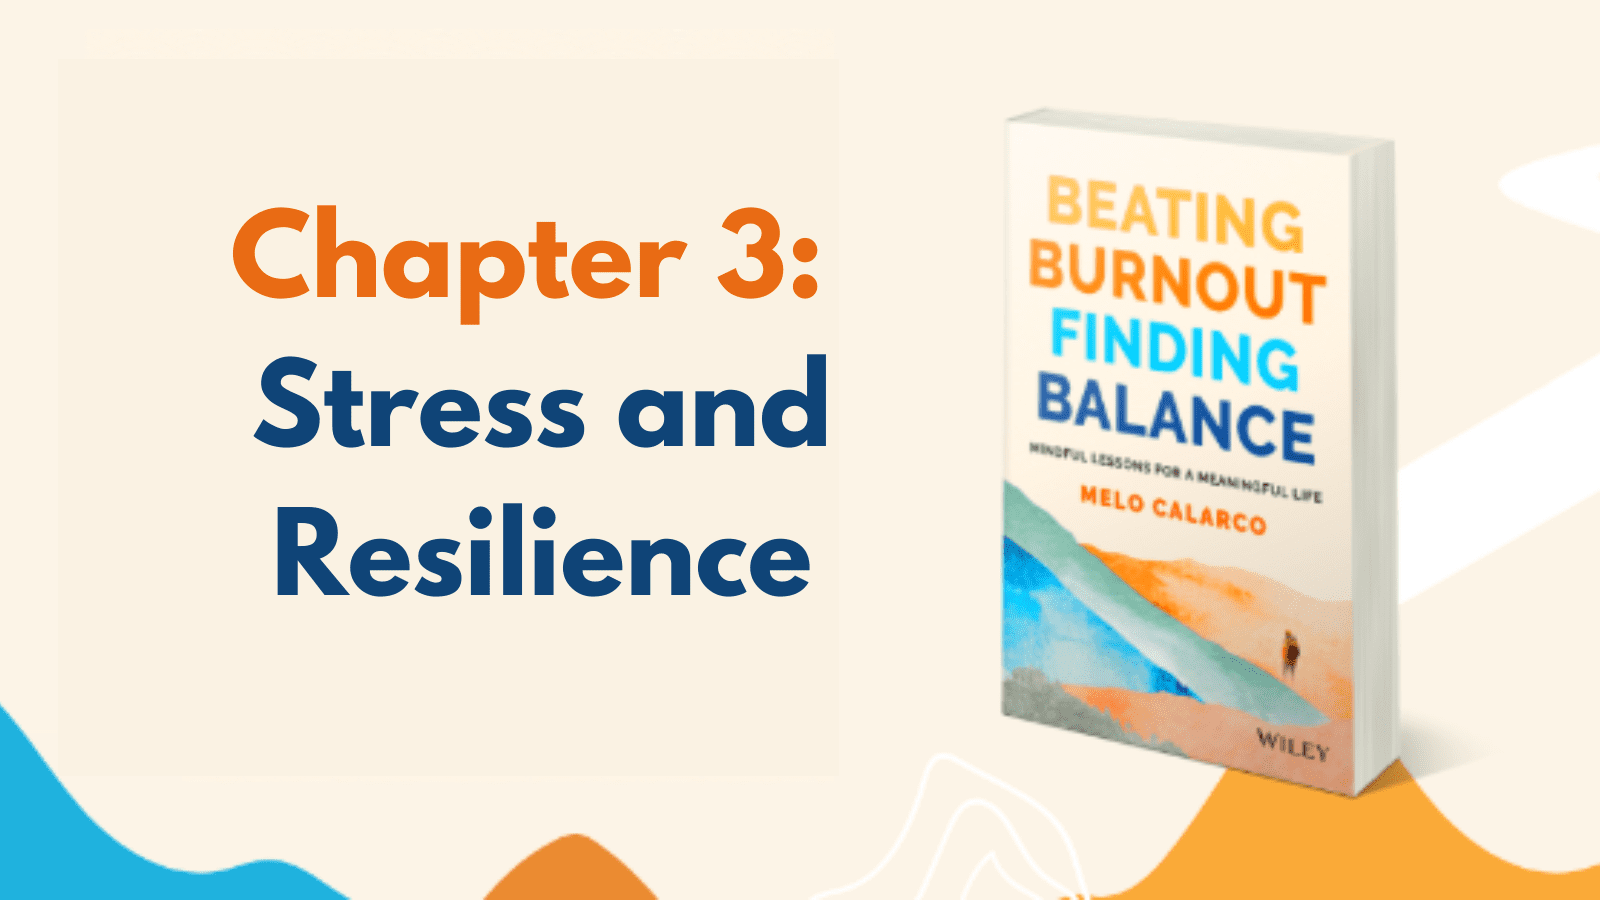 Chapter 3: Stress and Resilience